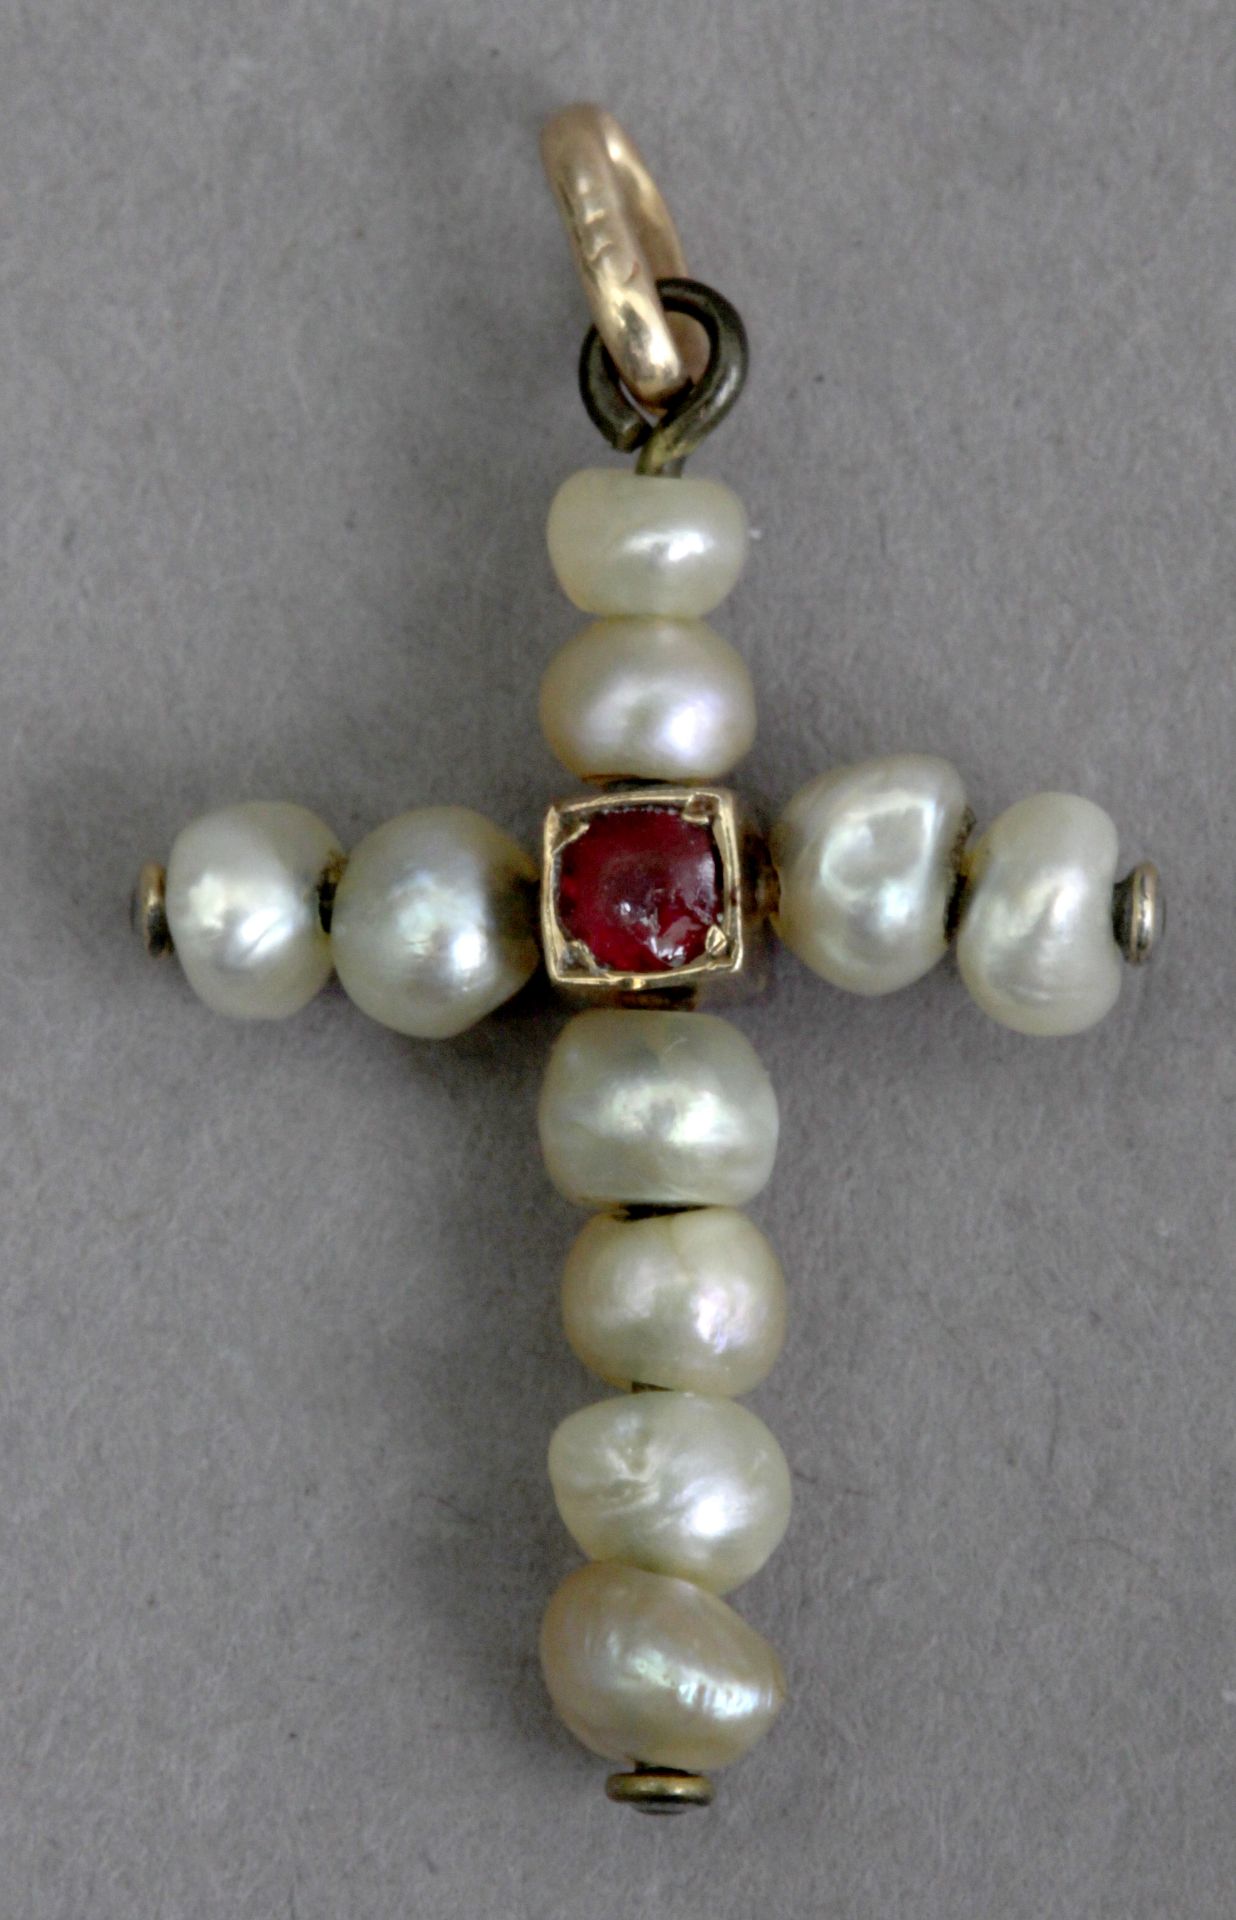 A 19th century freshwater pearls, diamonds, and rubies pendant cross